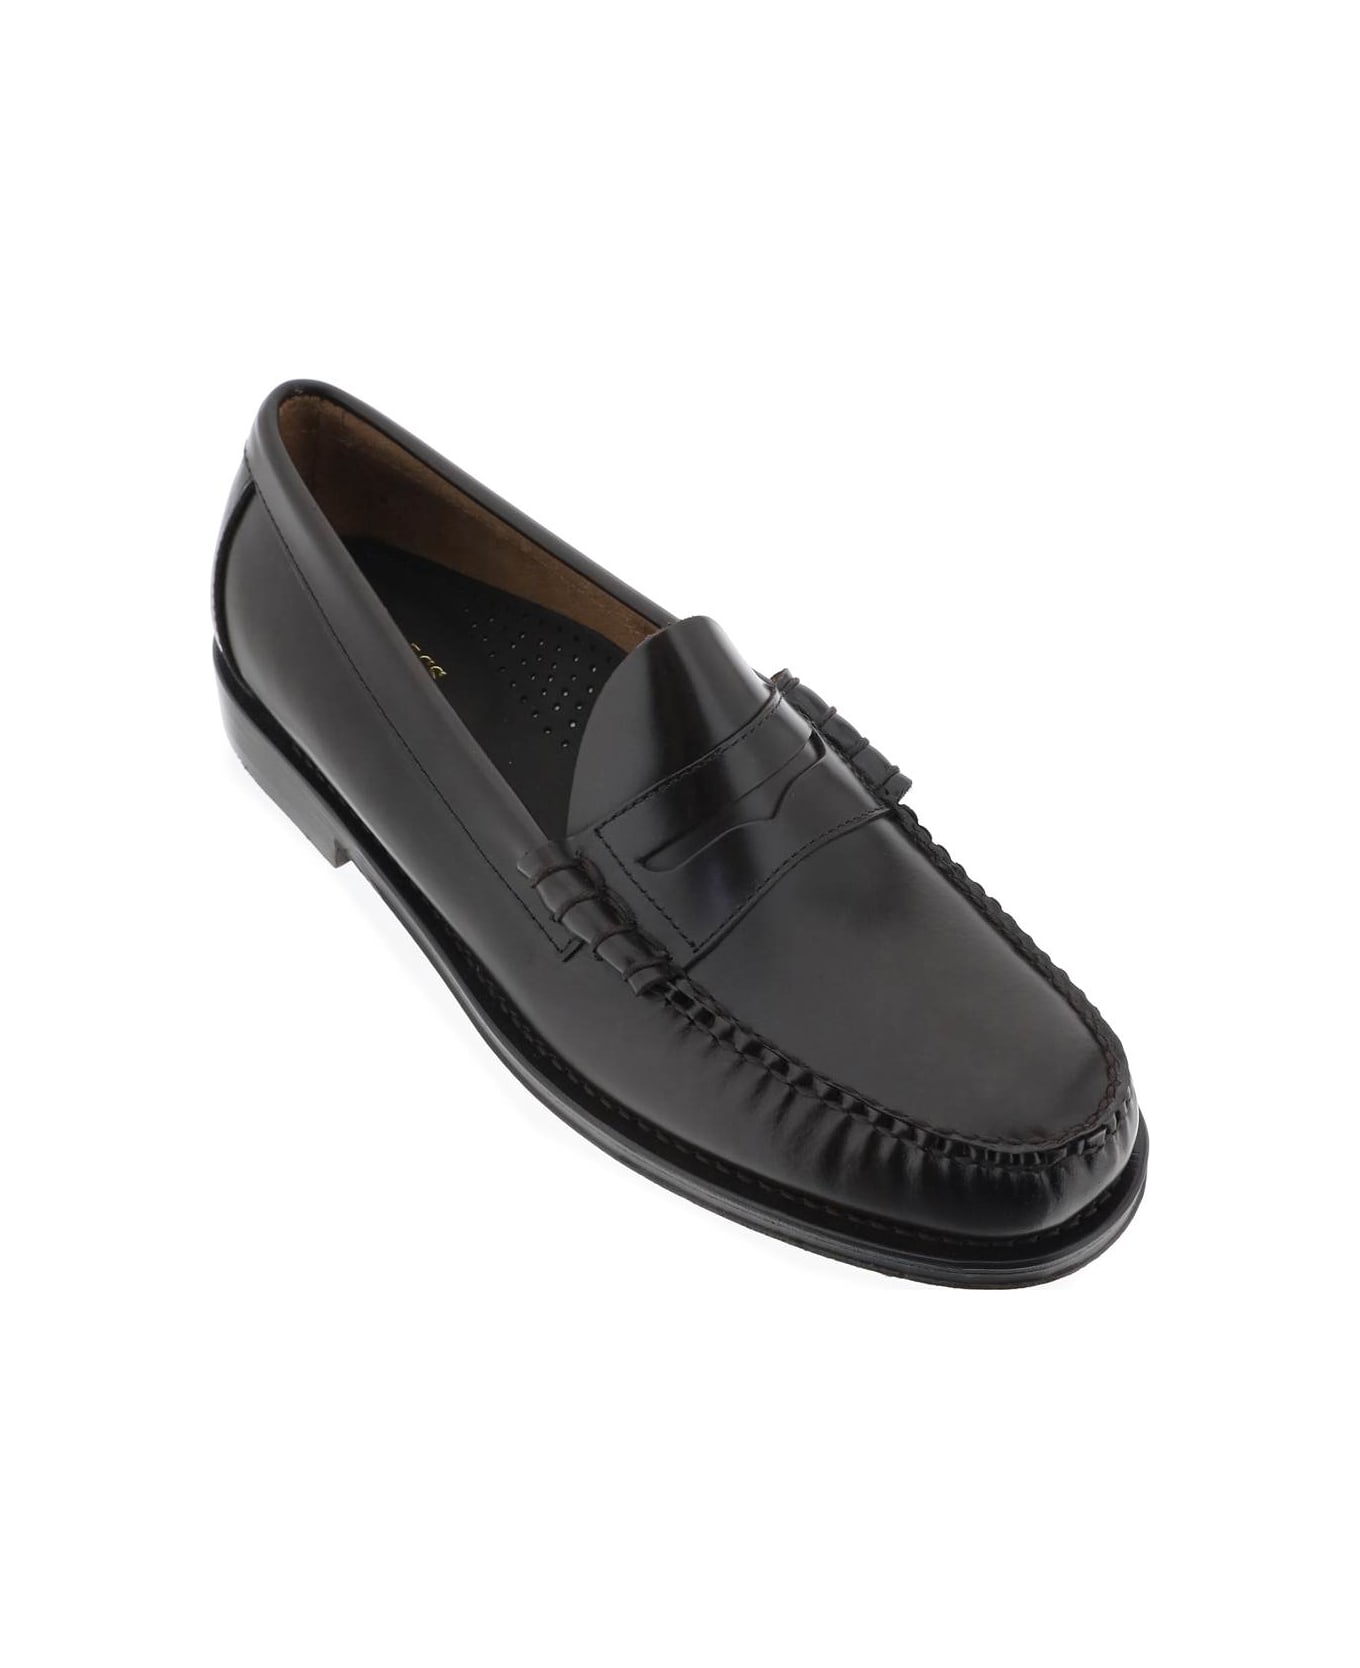 G.H.Bass & Co. Weejuns Larson Penny Loafers - CHOCOLATE (Brown)